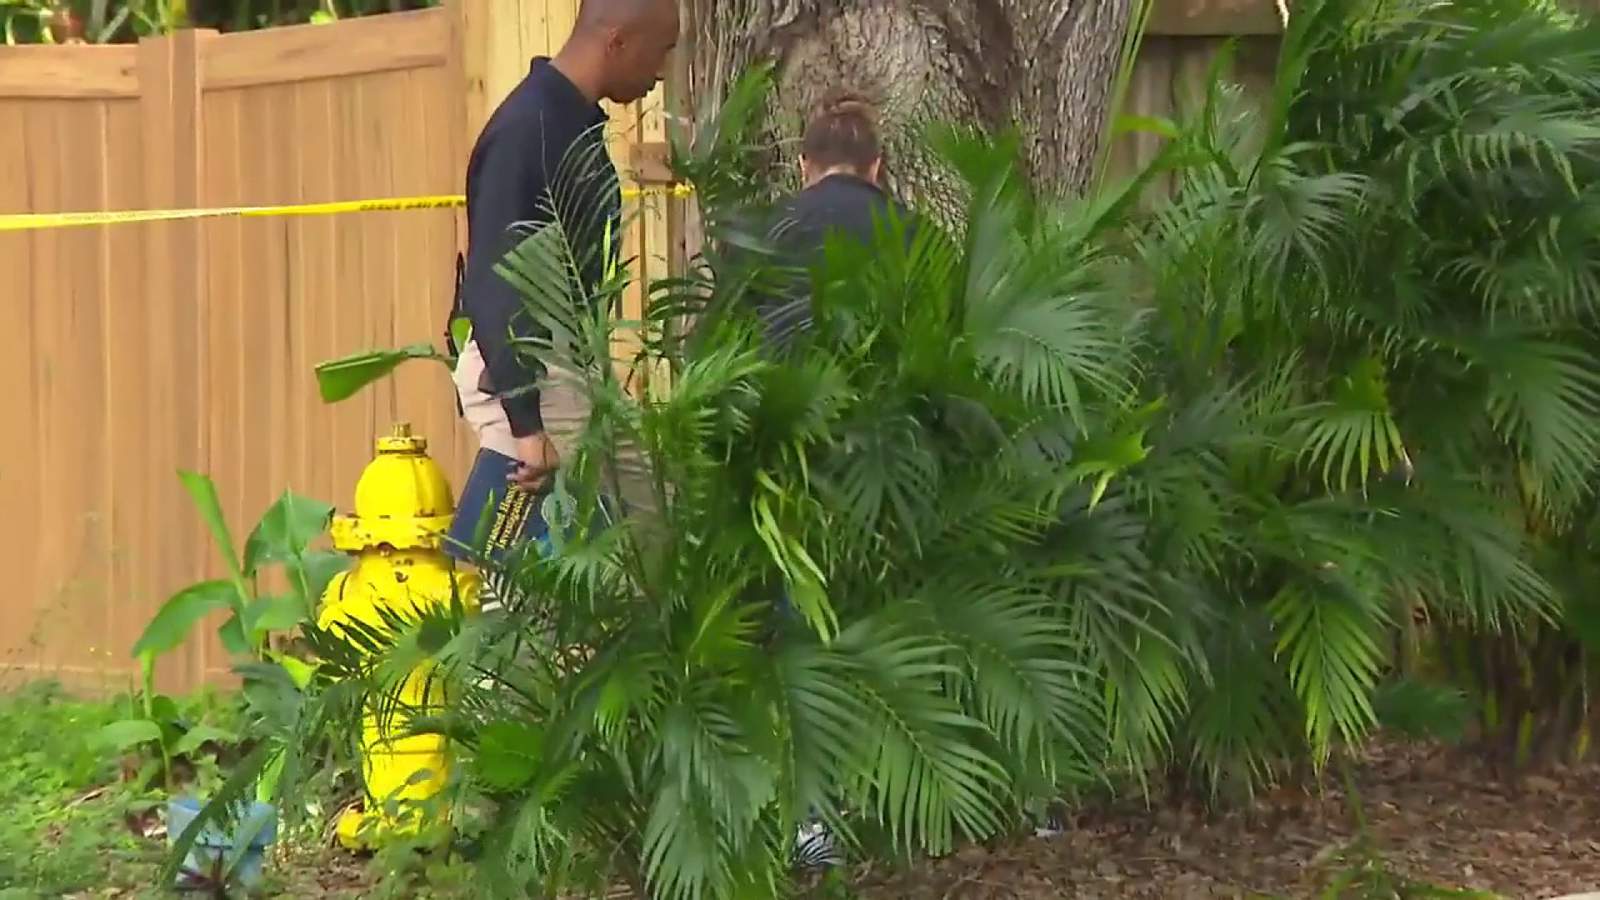 Man dies after shooting in front of Davie home